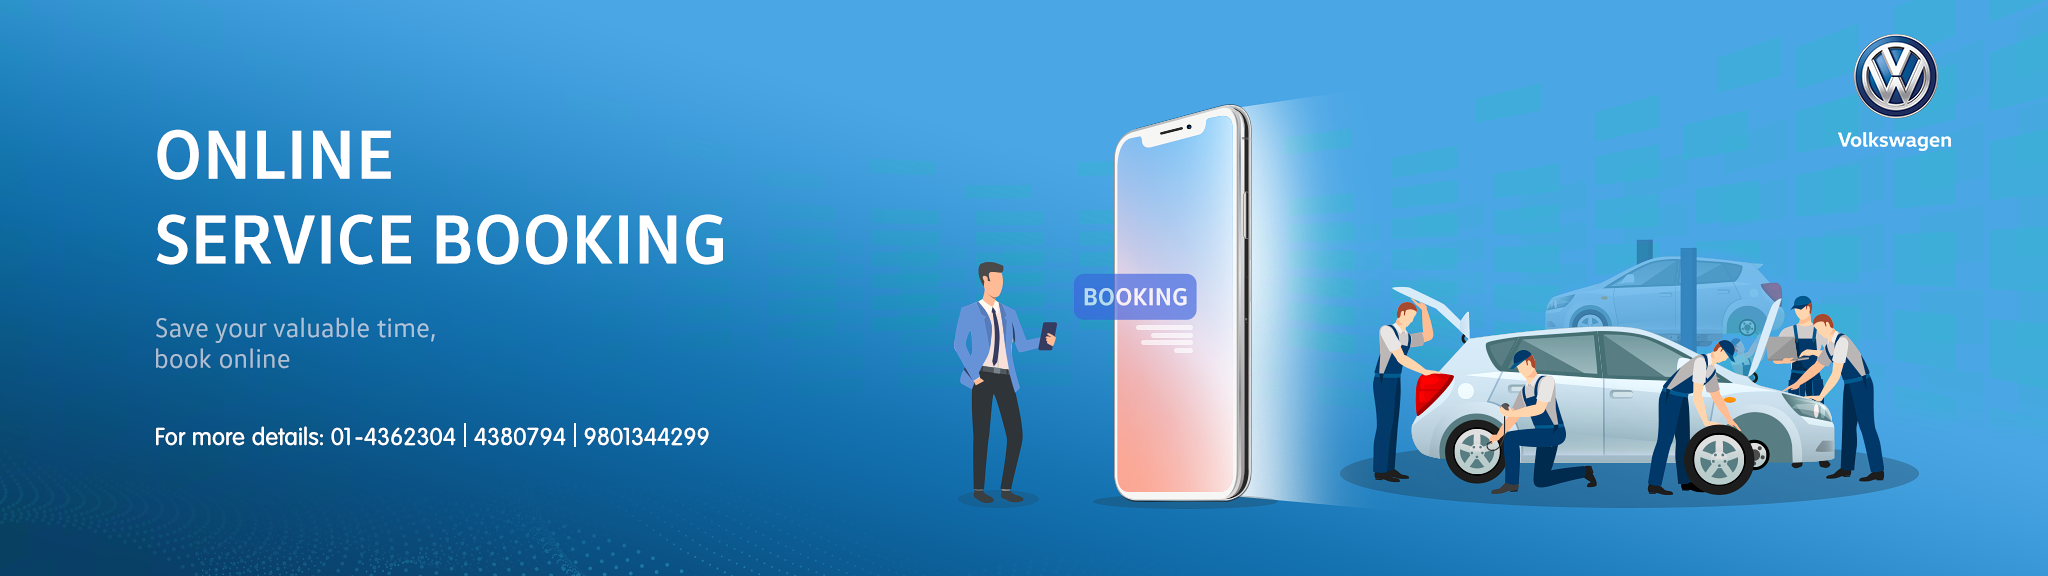 Online Service Booking